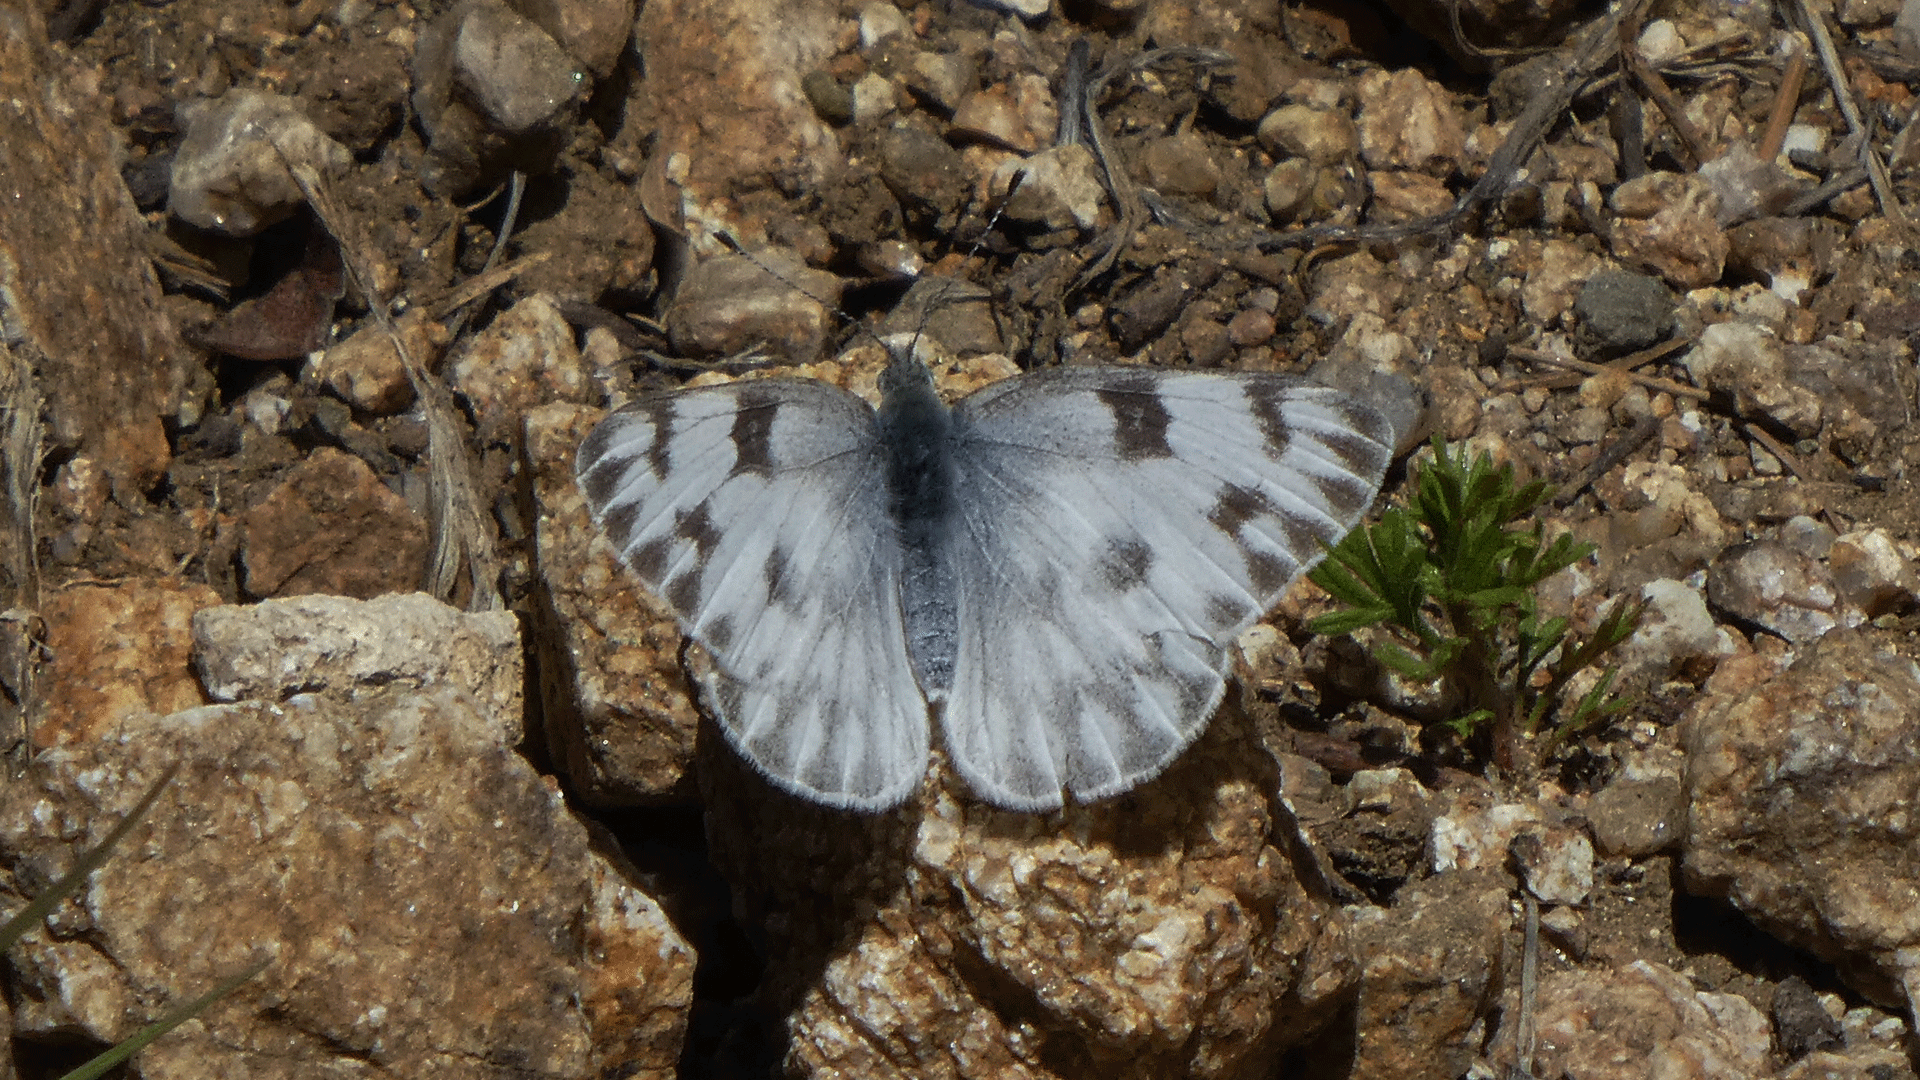 Female, Sandia Mountain west foothills, May 2019